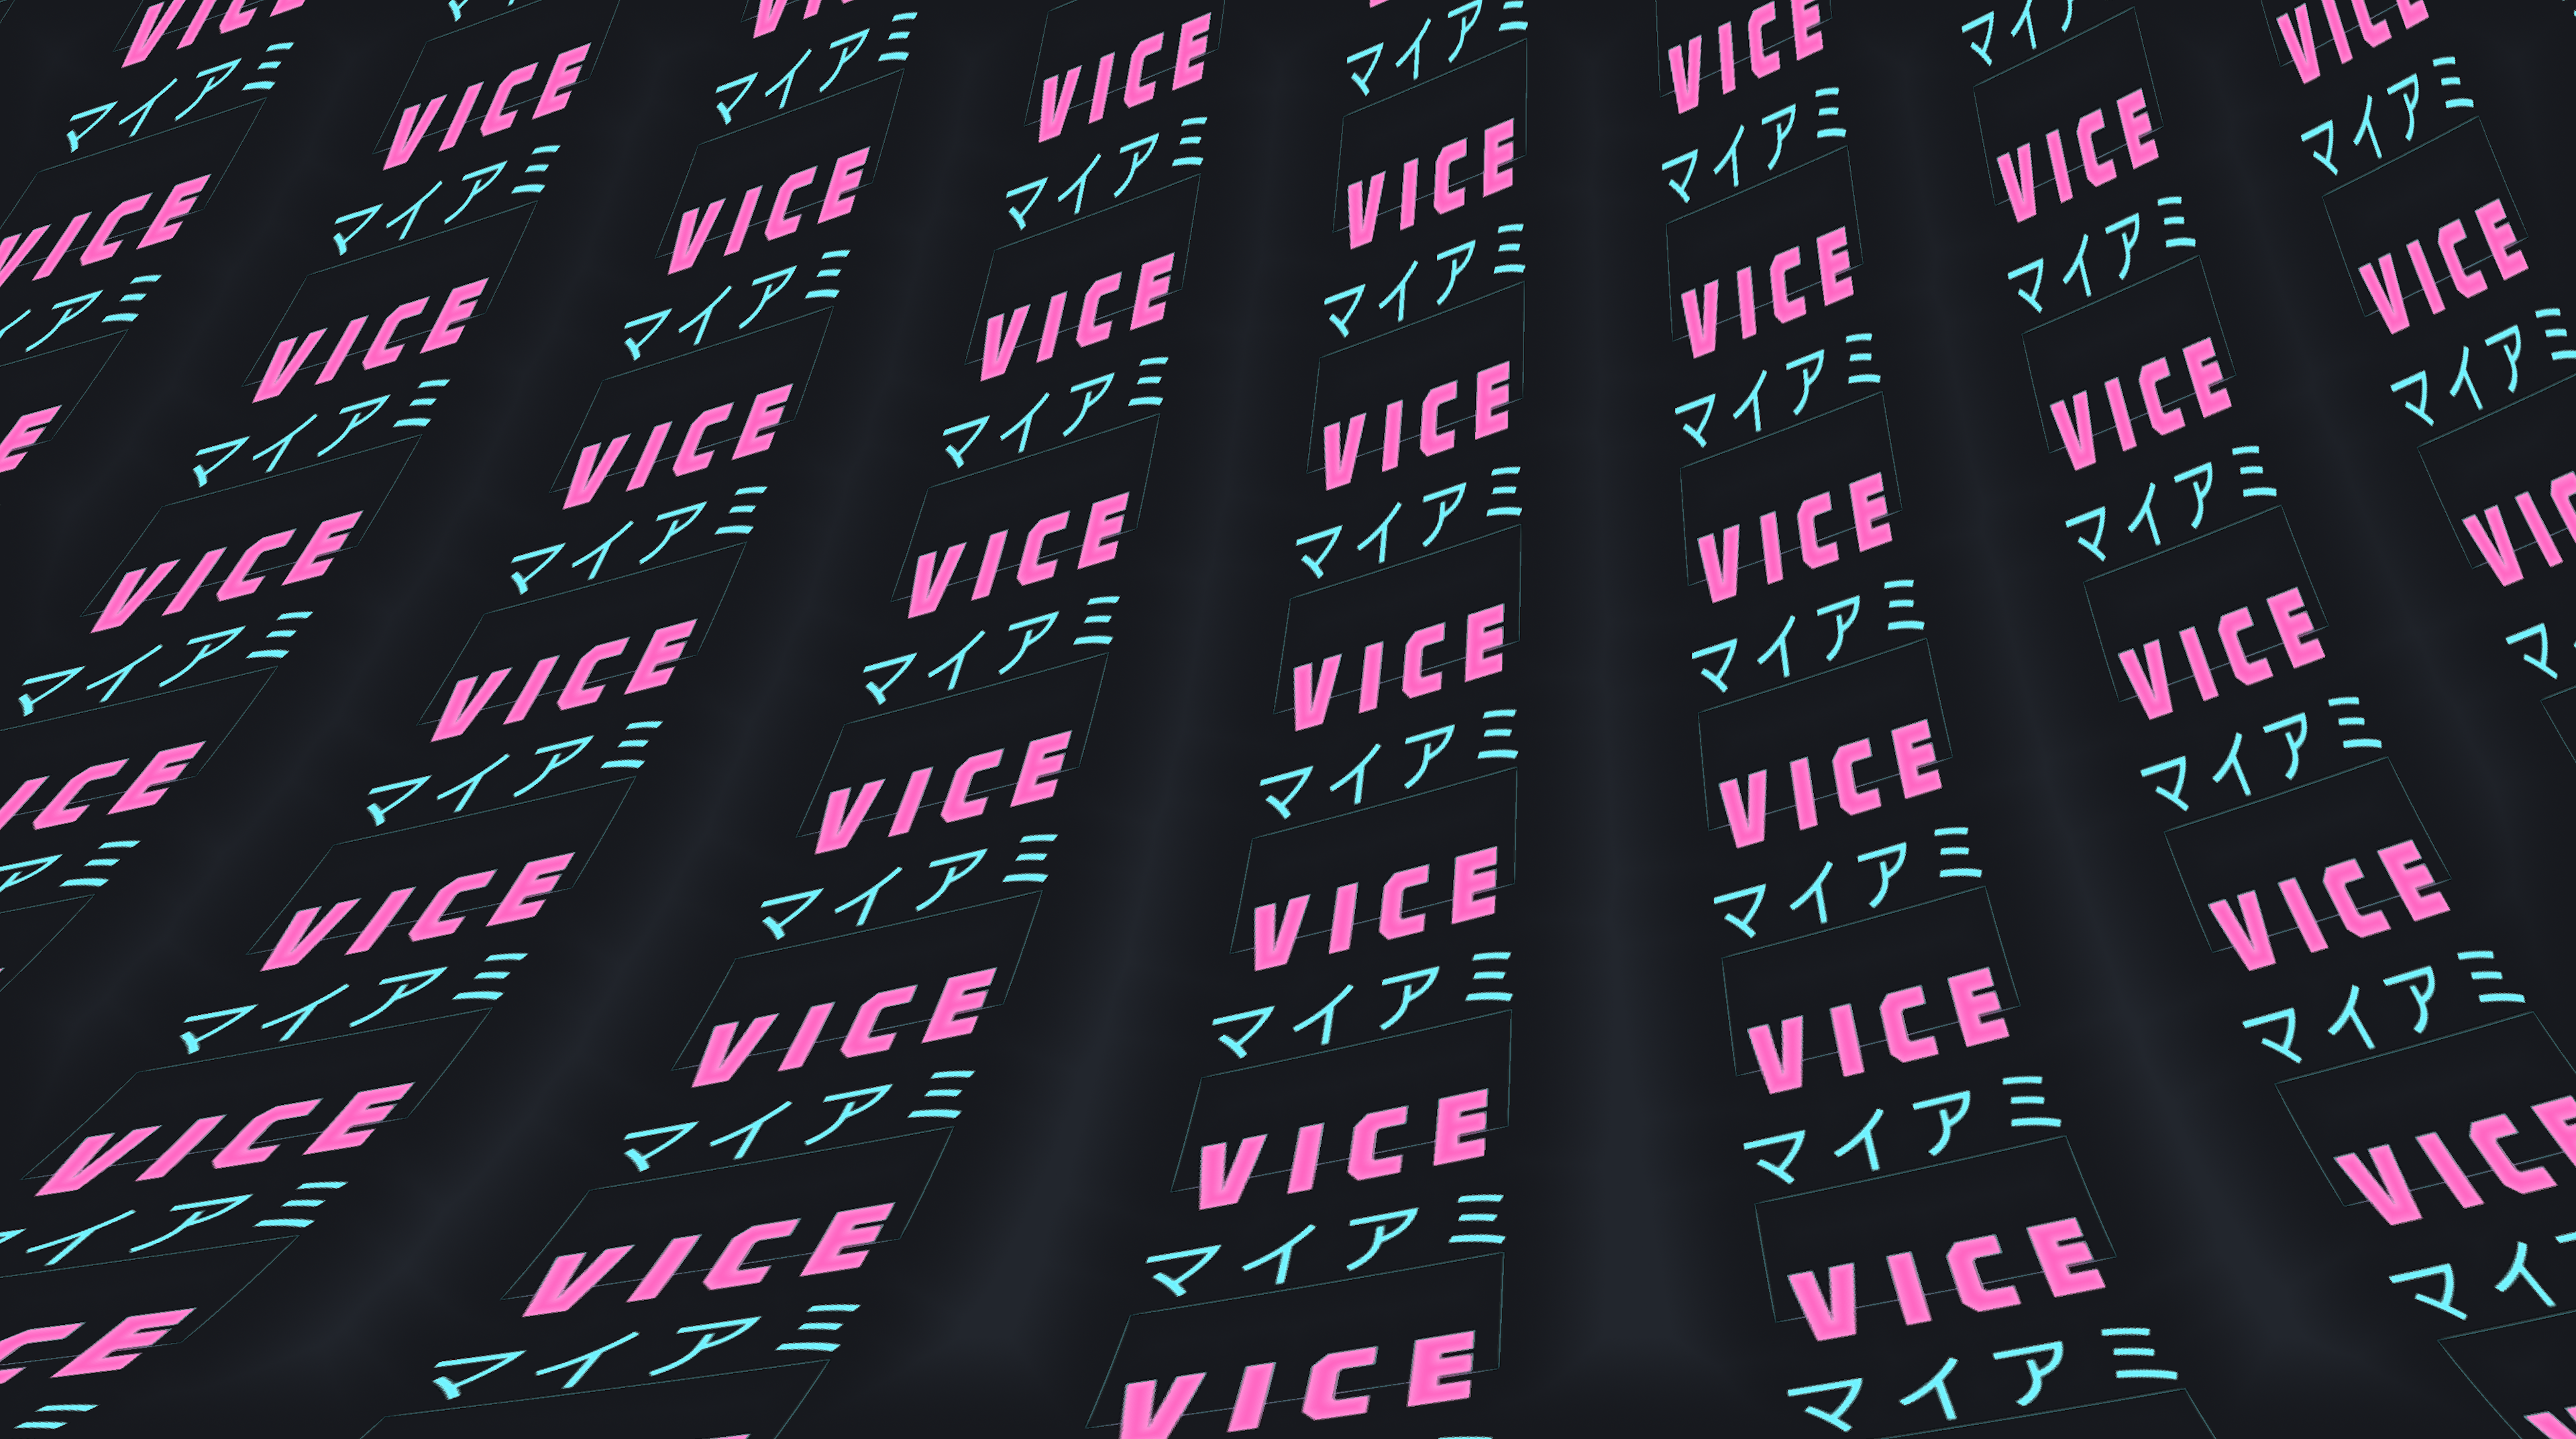 Example usage of the Vice Color Scheme